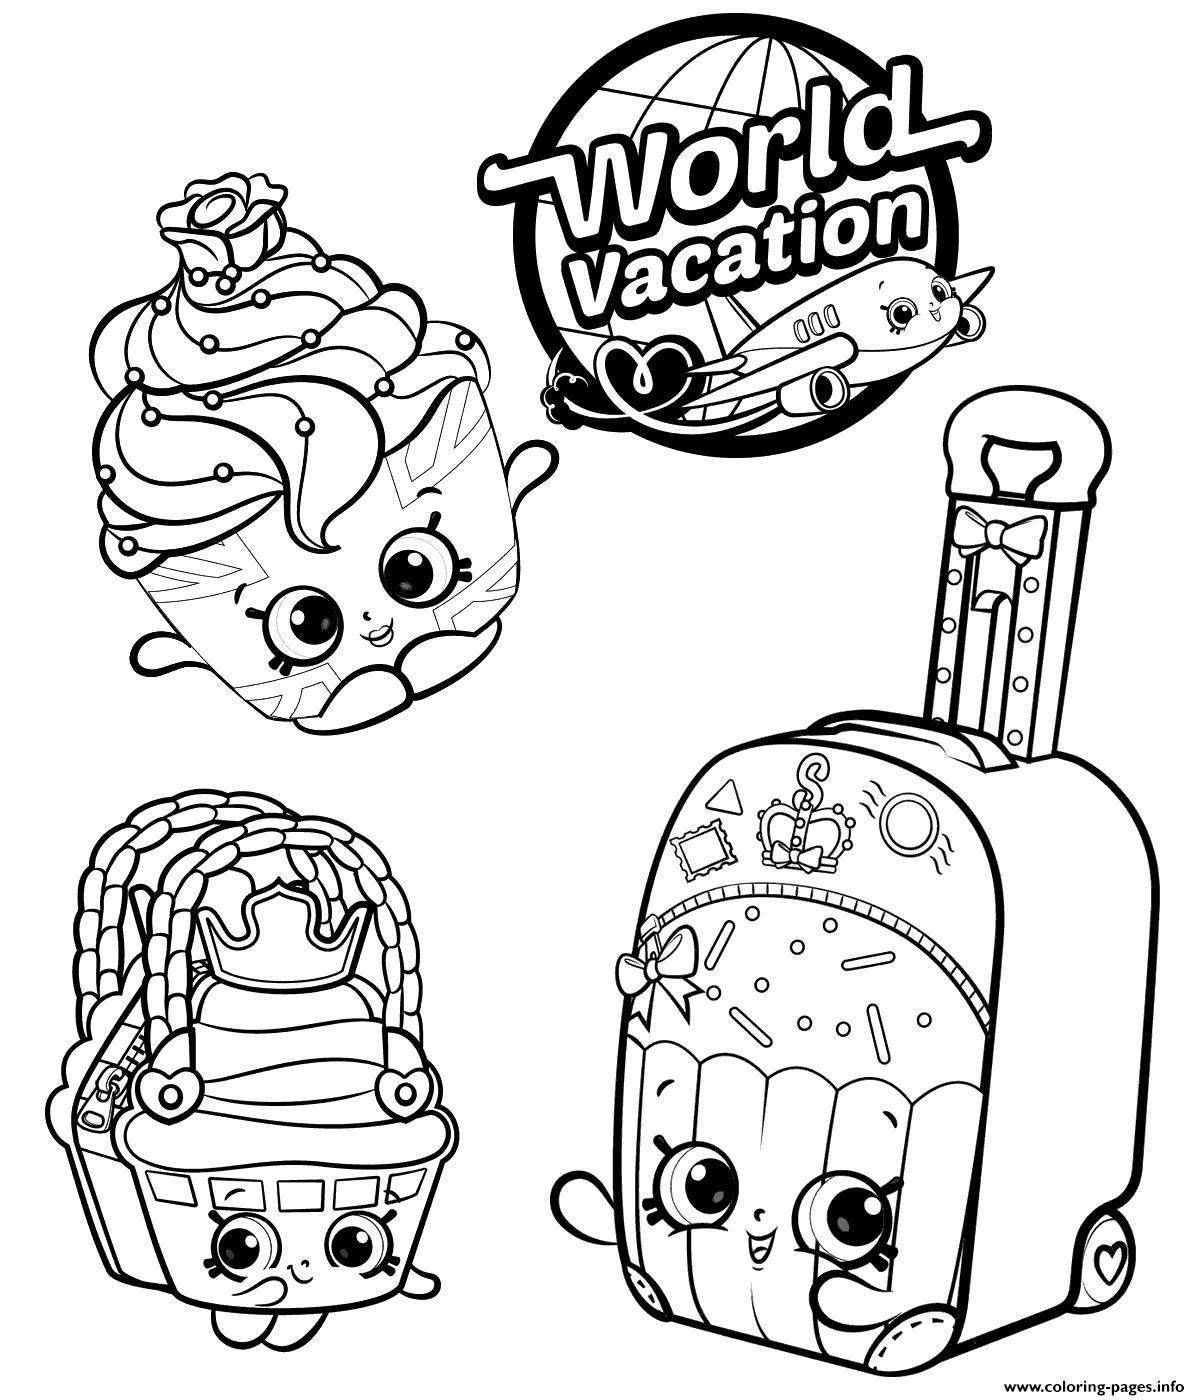 Shopkins fun coloring pages for kids